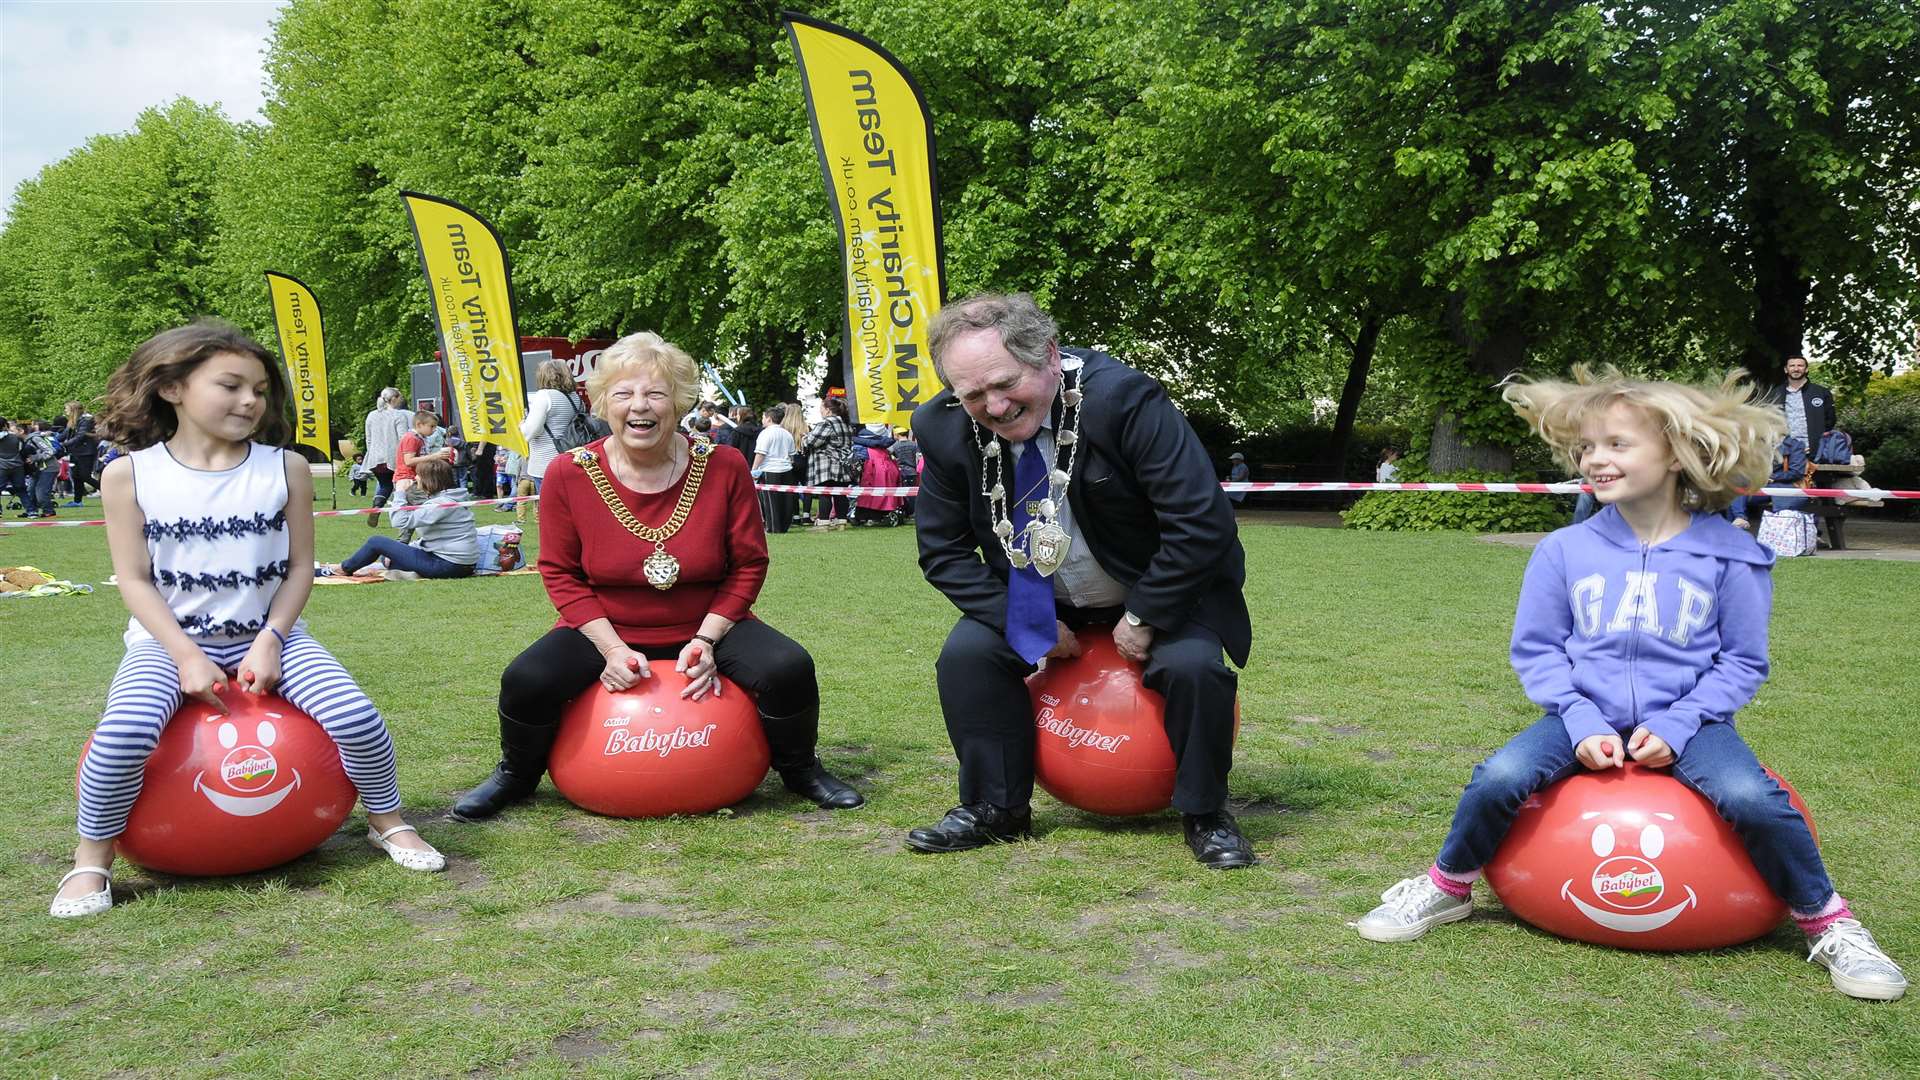 Chloe Rose, seven from Sandown Primary School, Deal, the Lord Mayor of Canterbury Ann Taylor, the Sheriff of Canterbury Tony Austin and Holly Horton, seven, from Slade Primary School, Tonbridge, take on the space hoppers at Buster's Big Bash 2015.